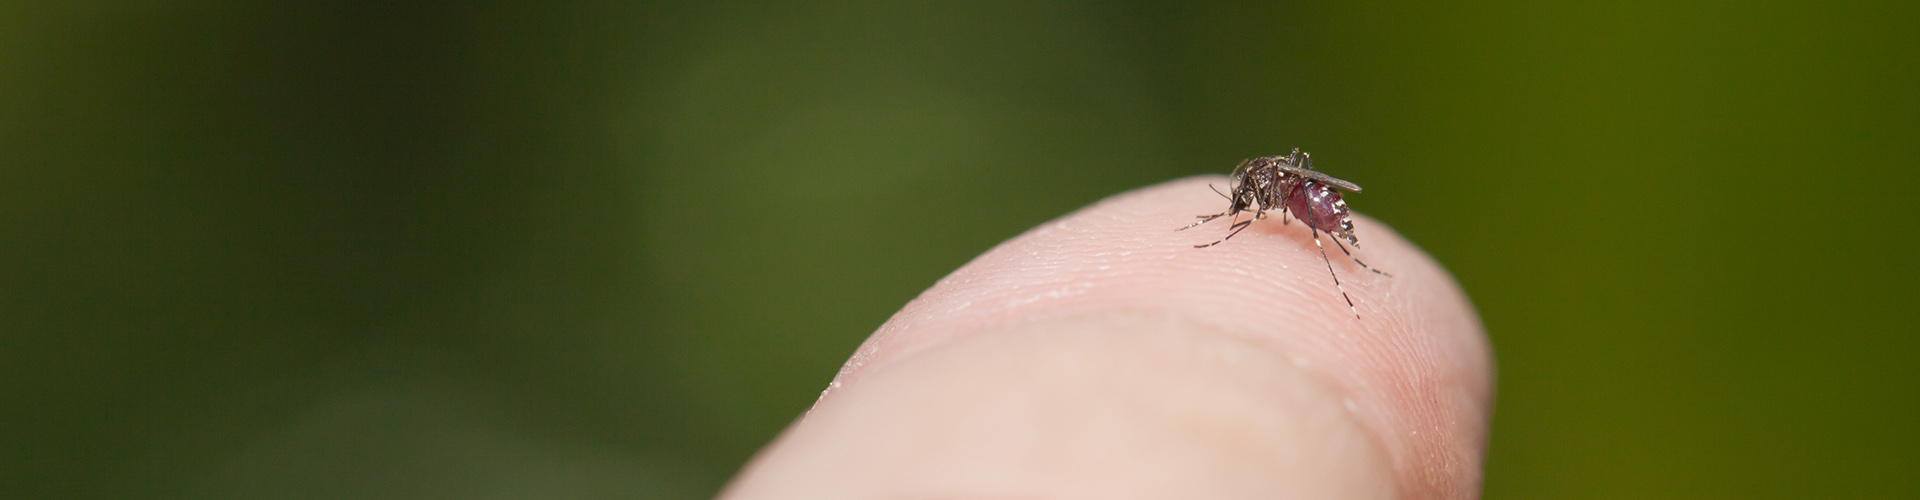 mosquito on a fingertip